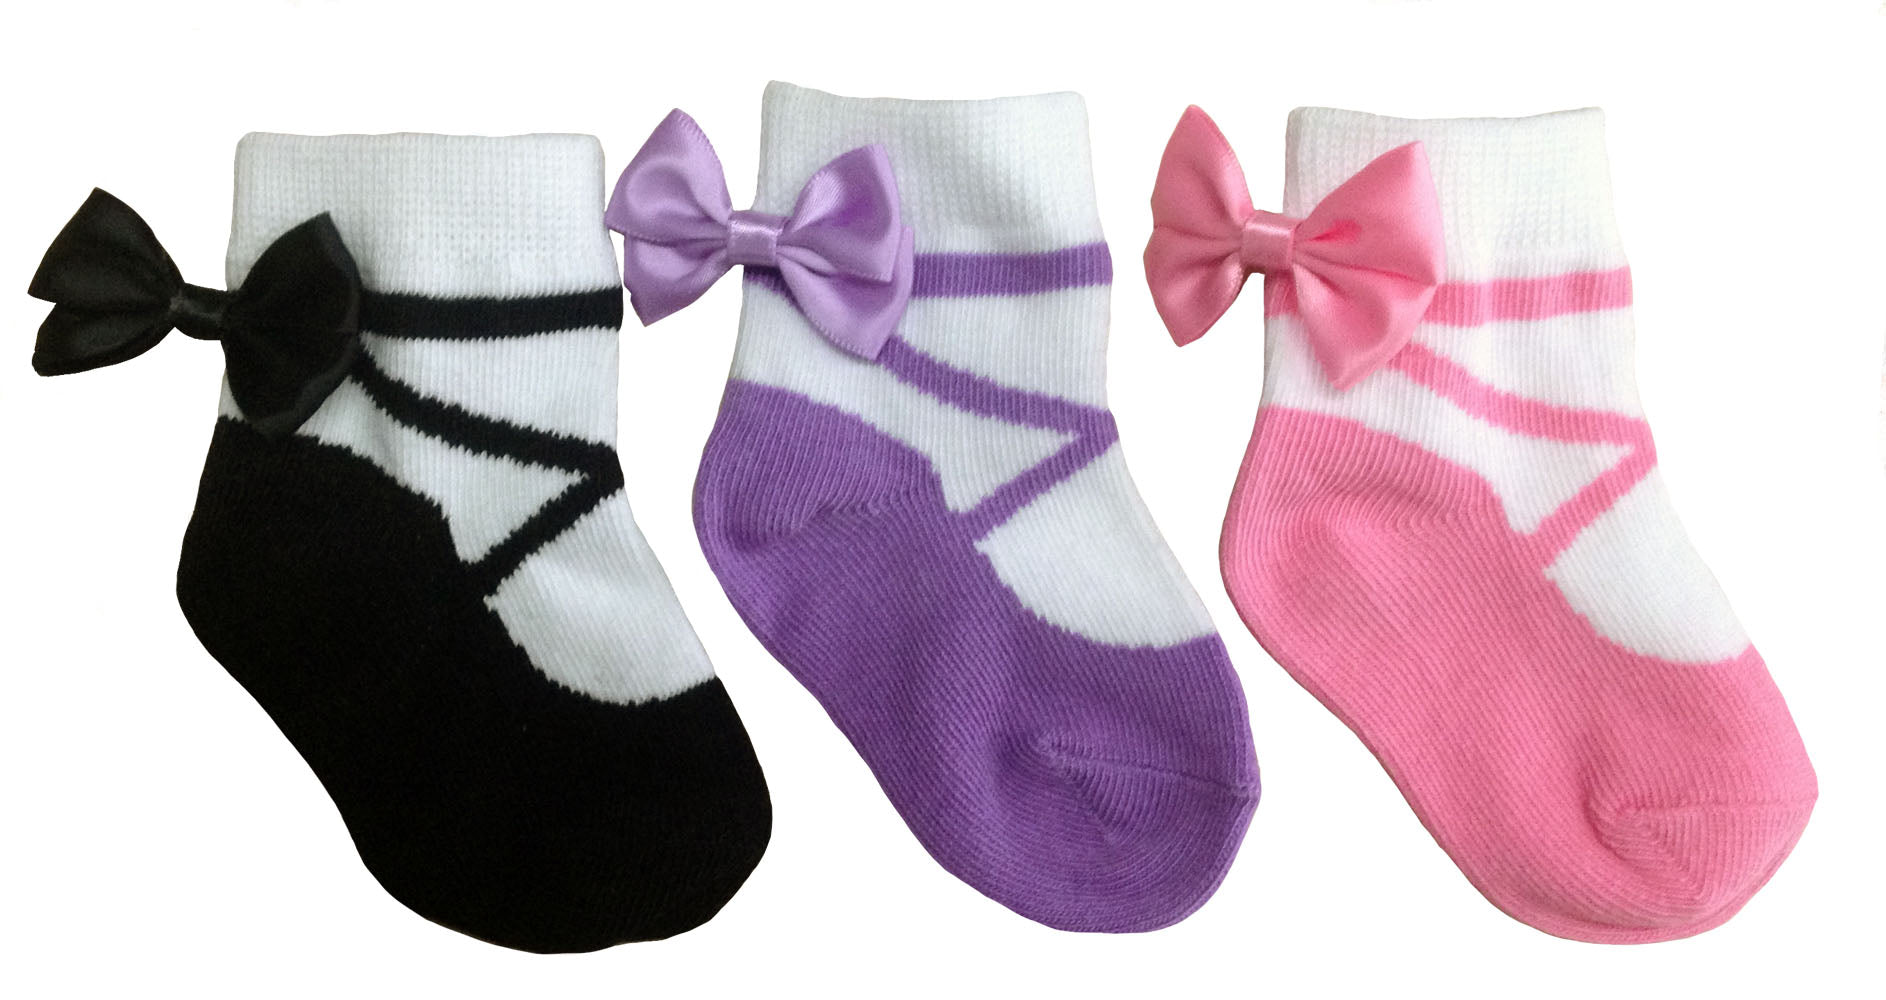 Ballerina infant baby socks for ages 0-12 months by Baby Emporio